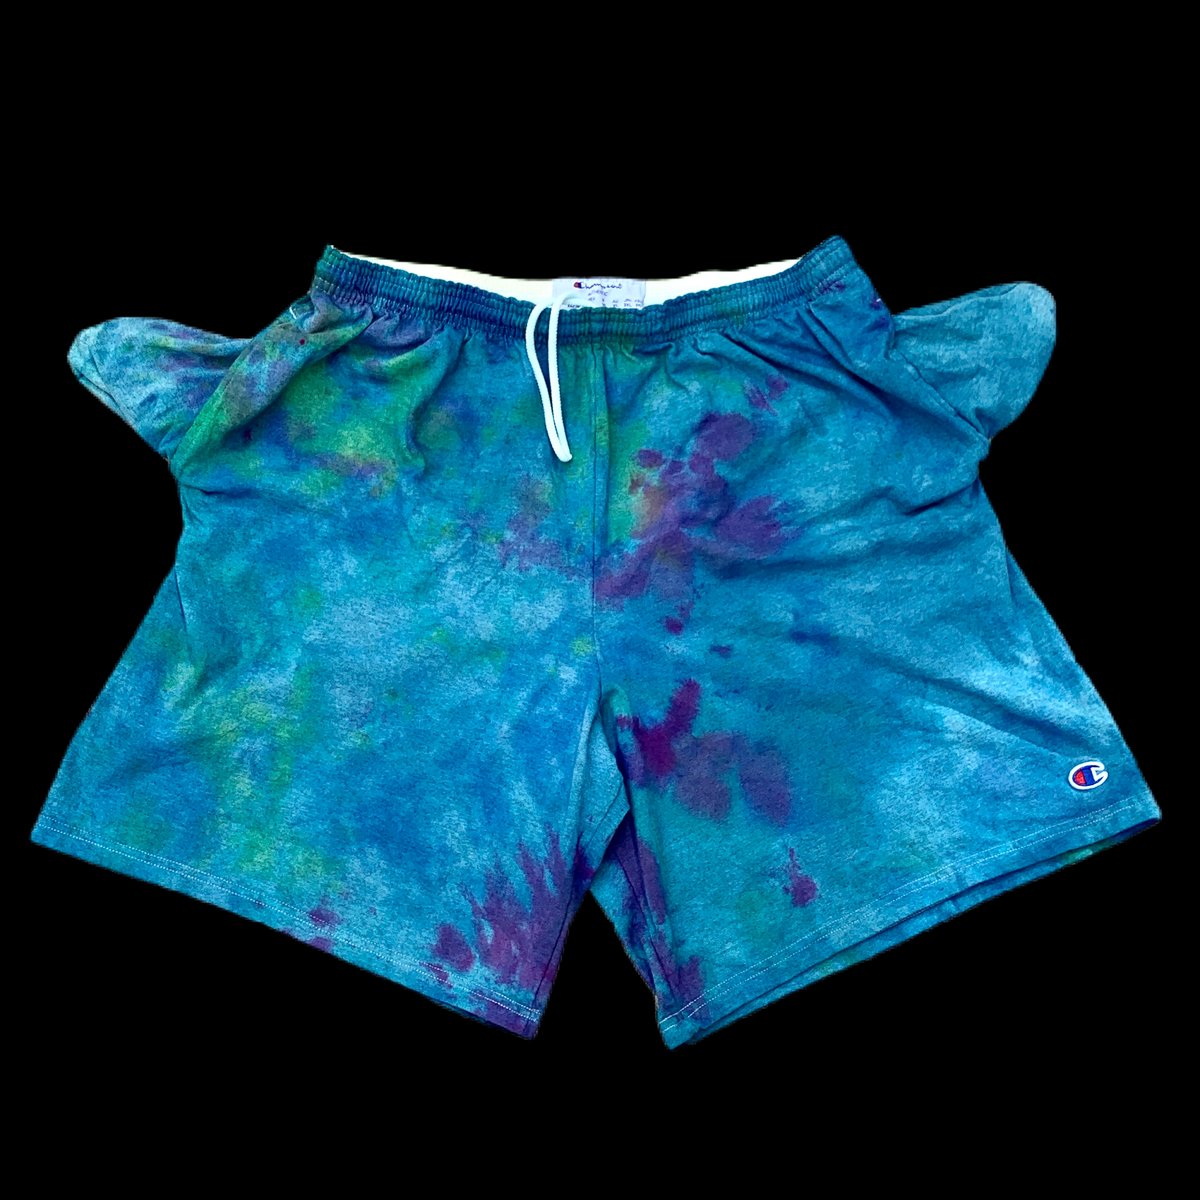 Custom Hand Dyed Champion Shorts! With Pockets!